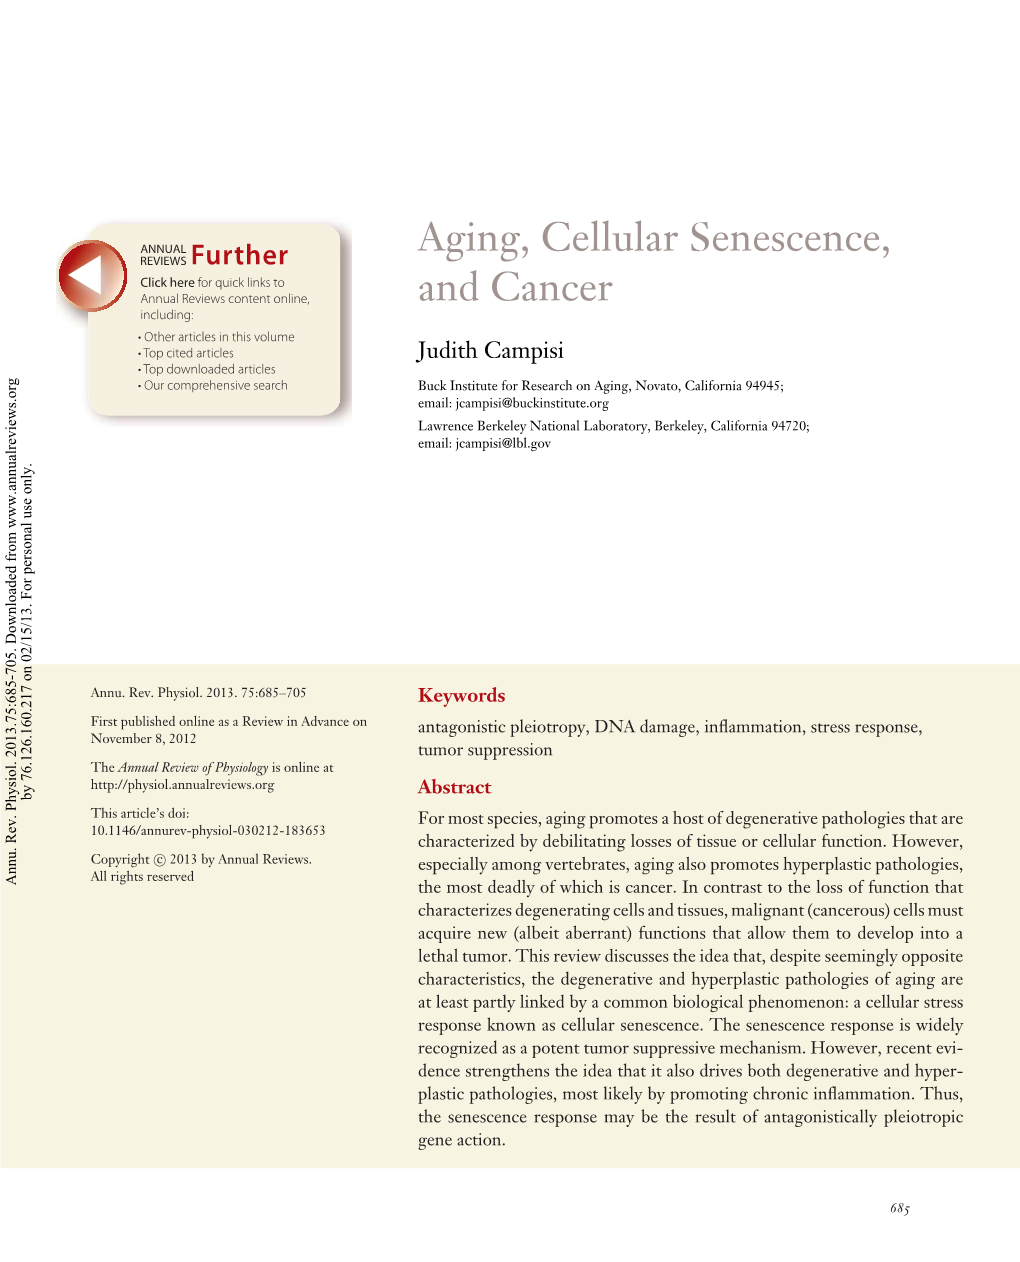 Aging, Cellular Senescence, and Cancer